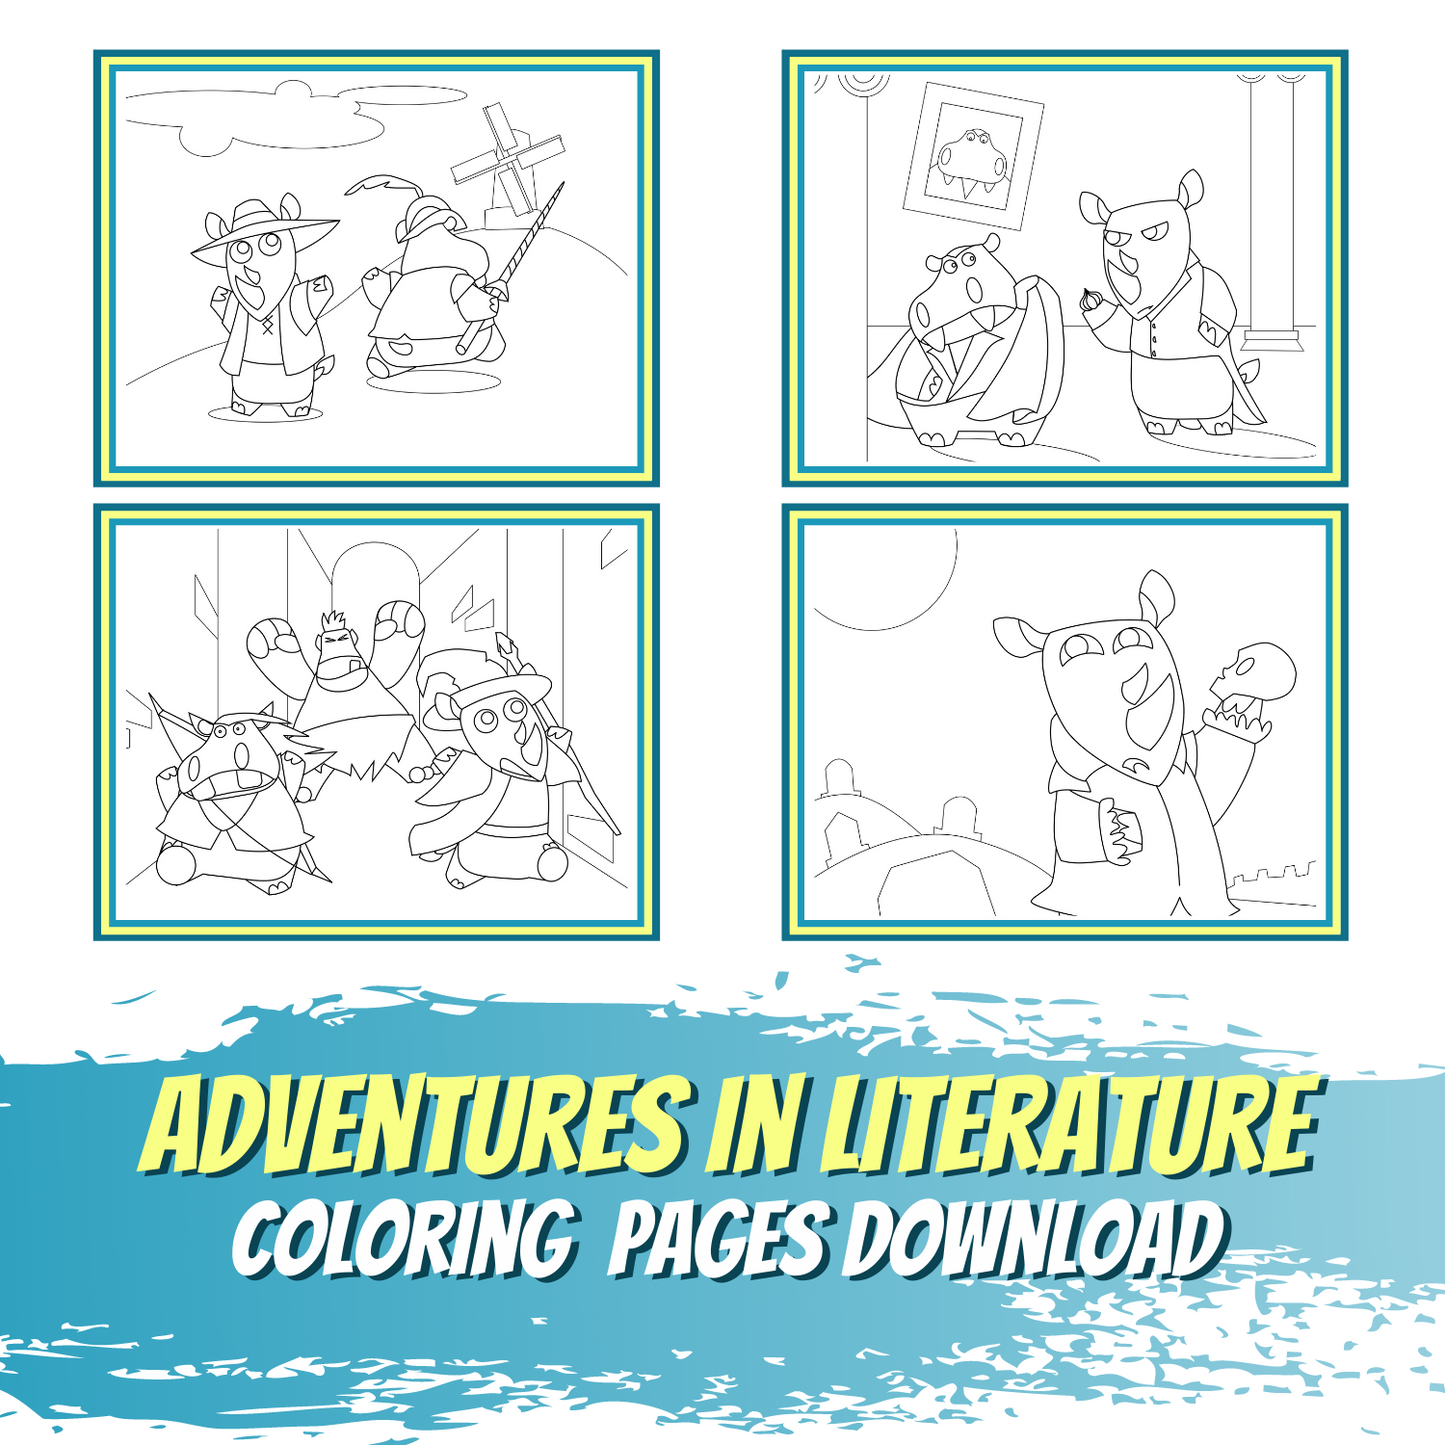 Adventures in Literature Coloring Pages